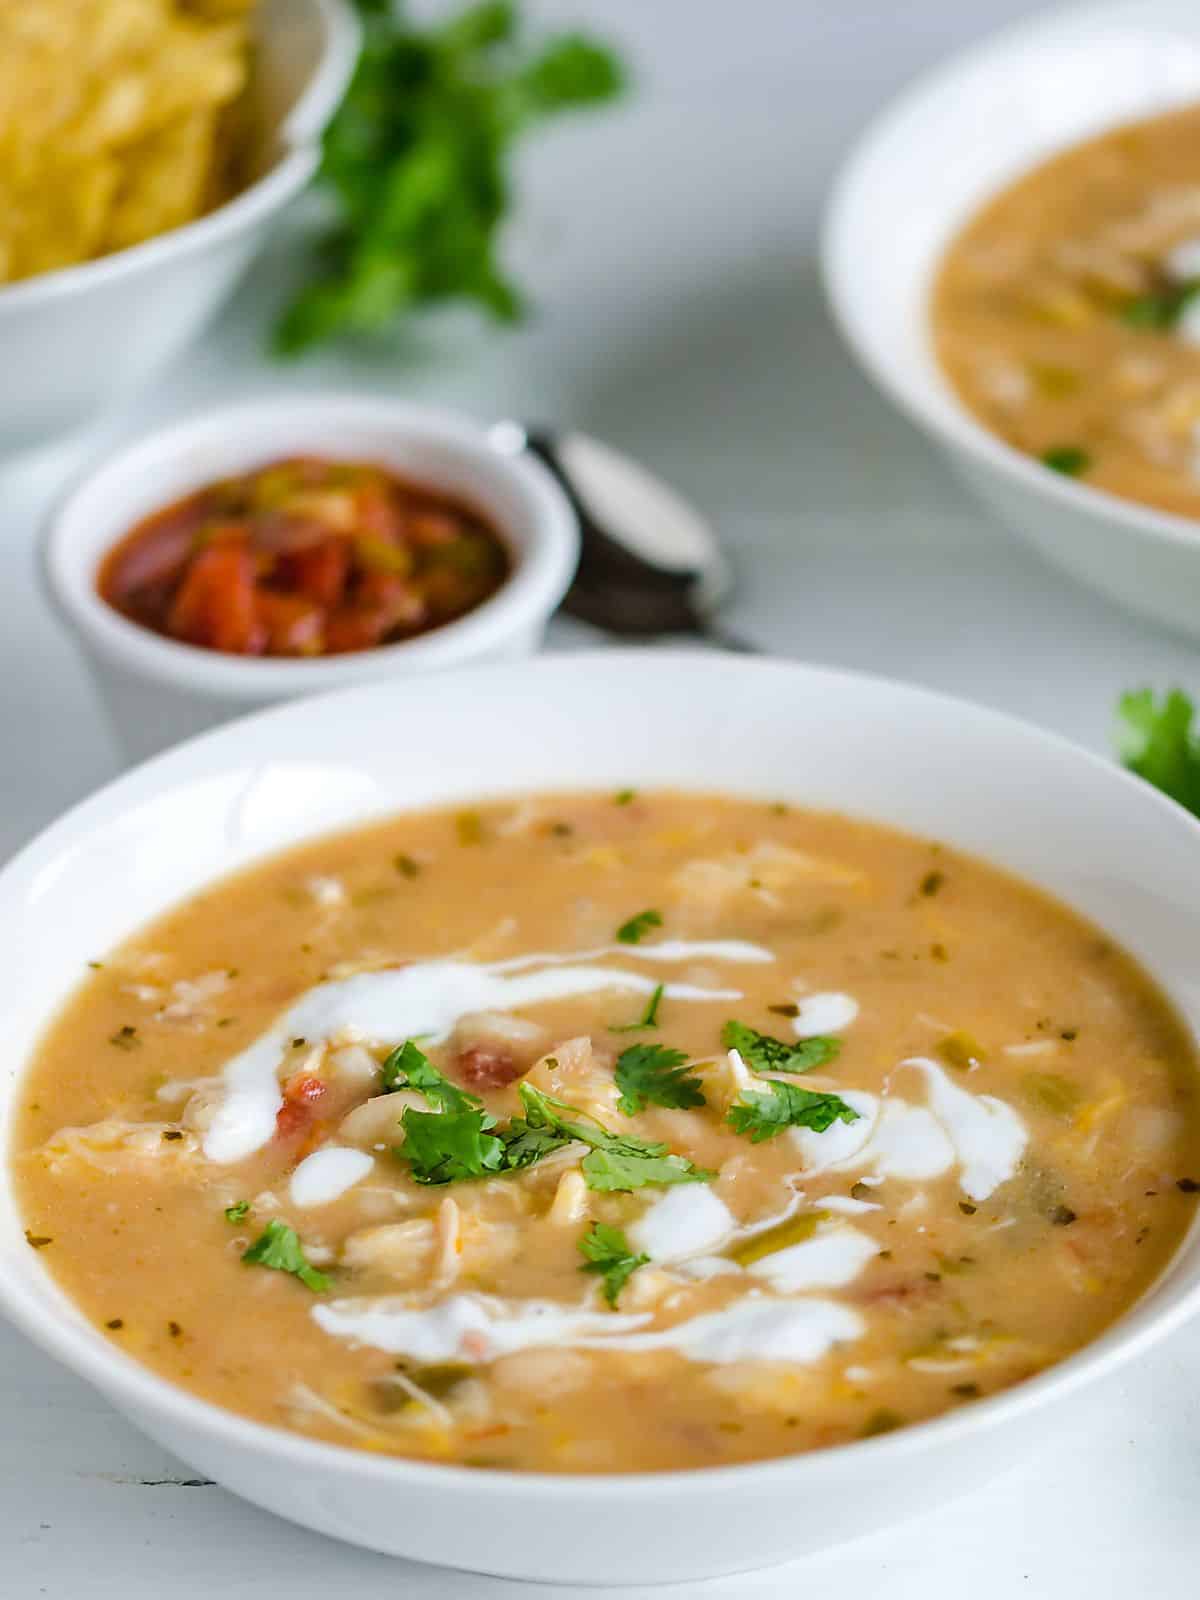 2 bowls of white chicken chili garnished with swirls of sour cream and cilantro served with chips and salsa